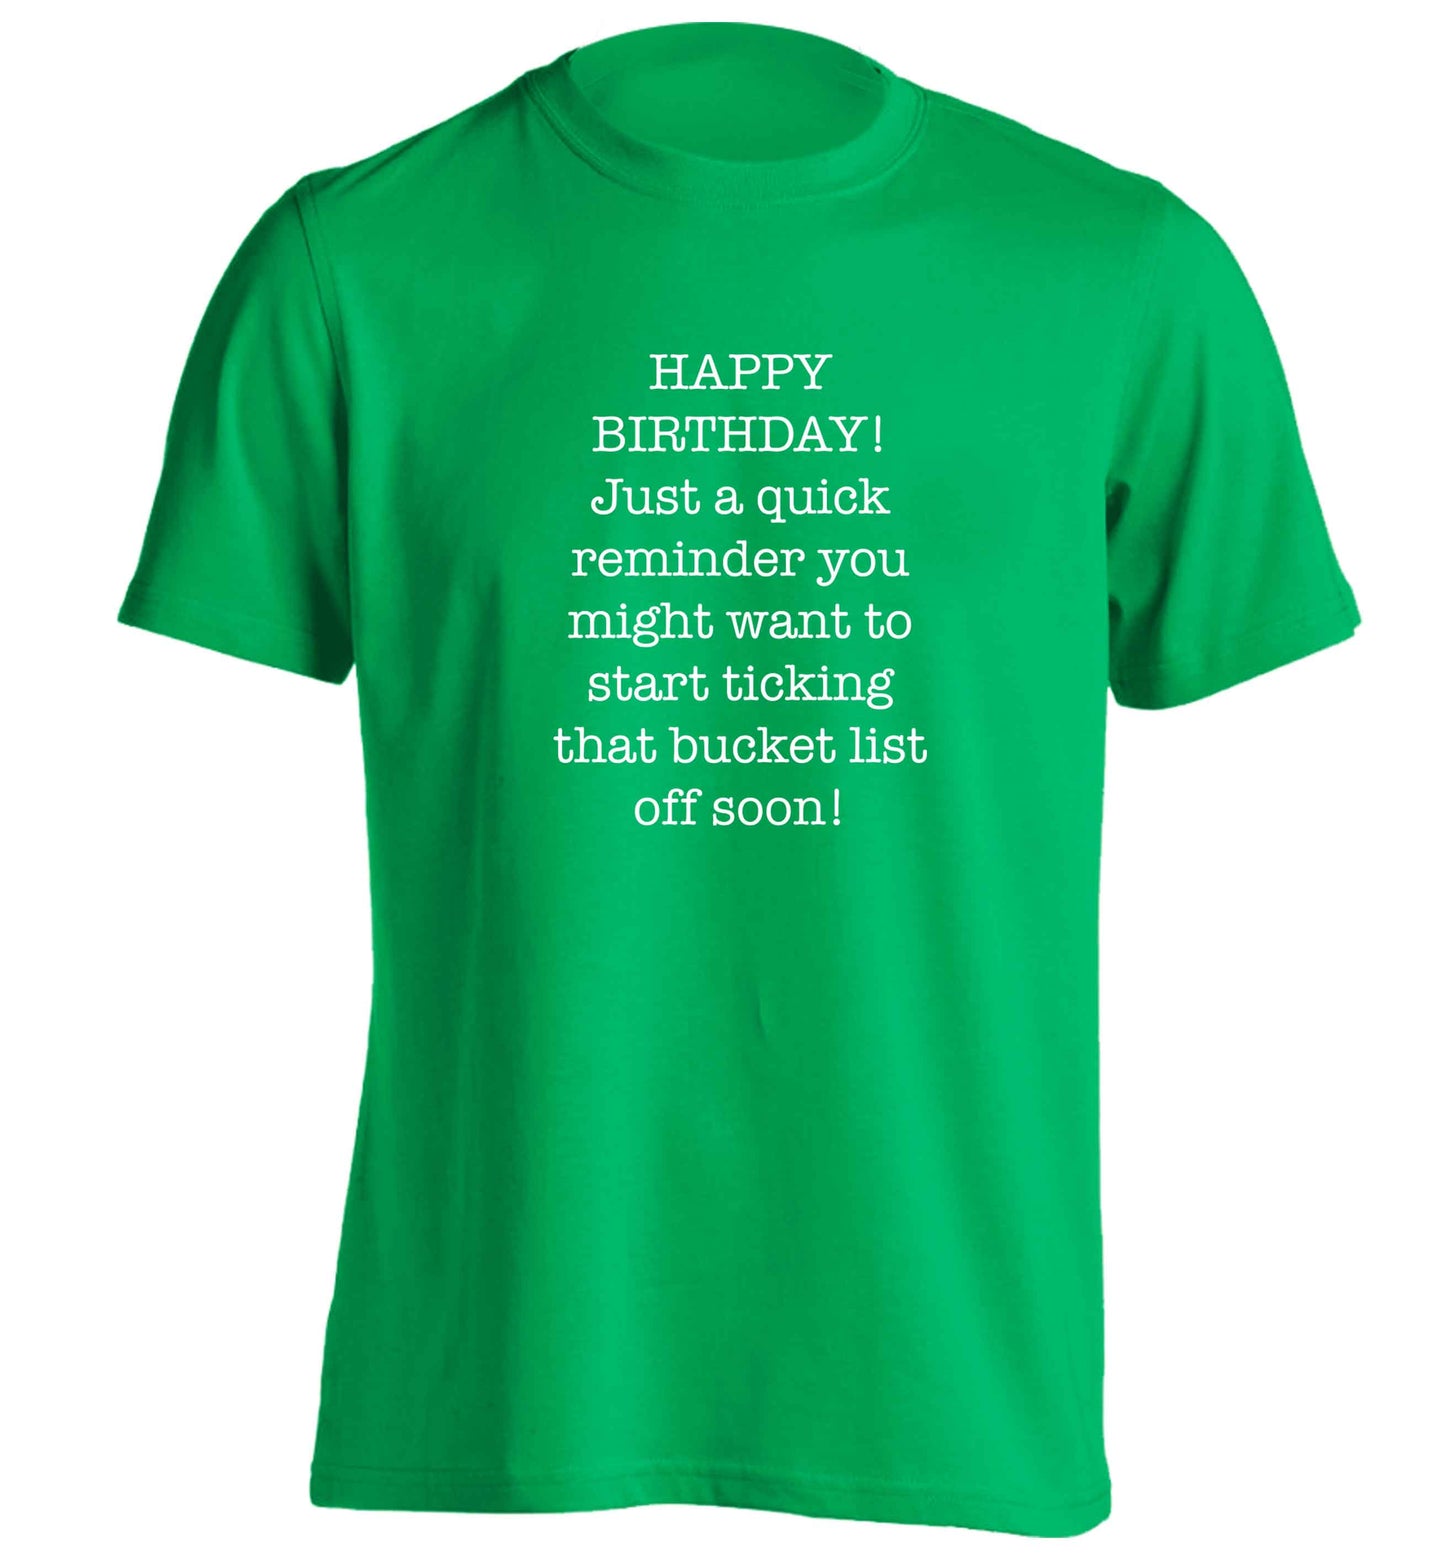 Happy birthday, just a quick reminder you might want to start ticking that bucket list off soon adults unisex green Tshirt 2XL